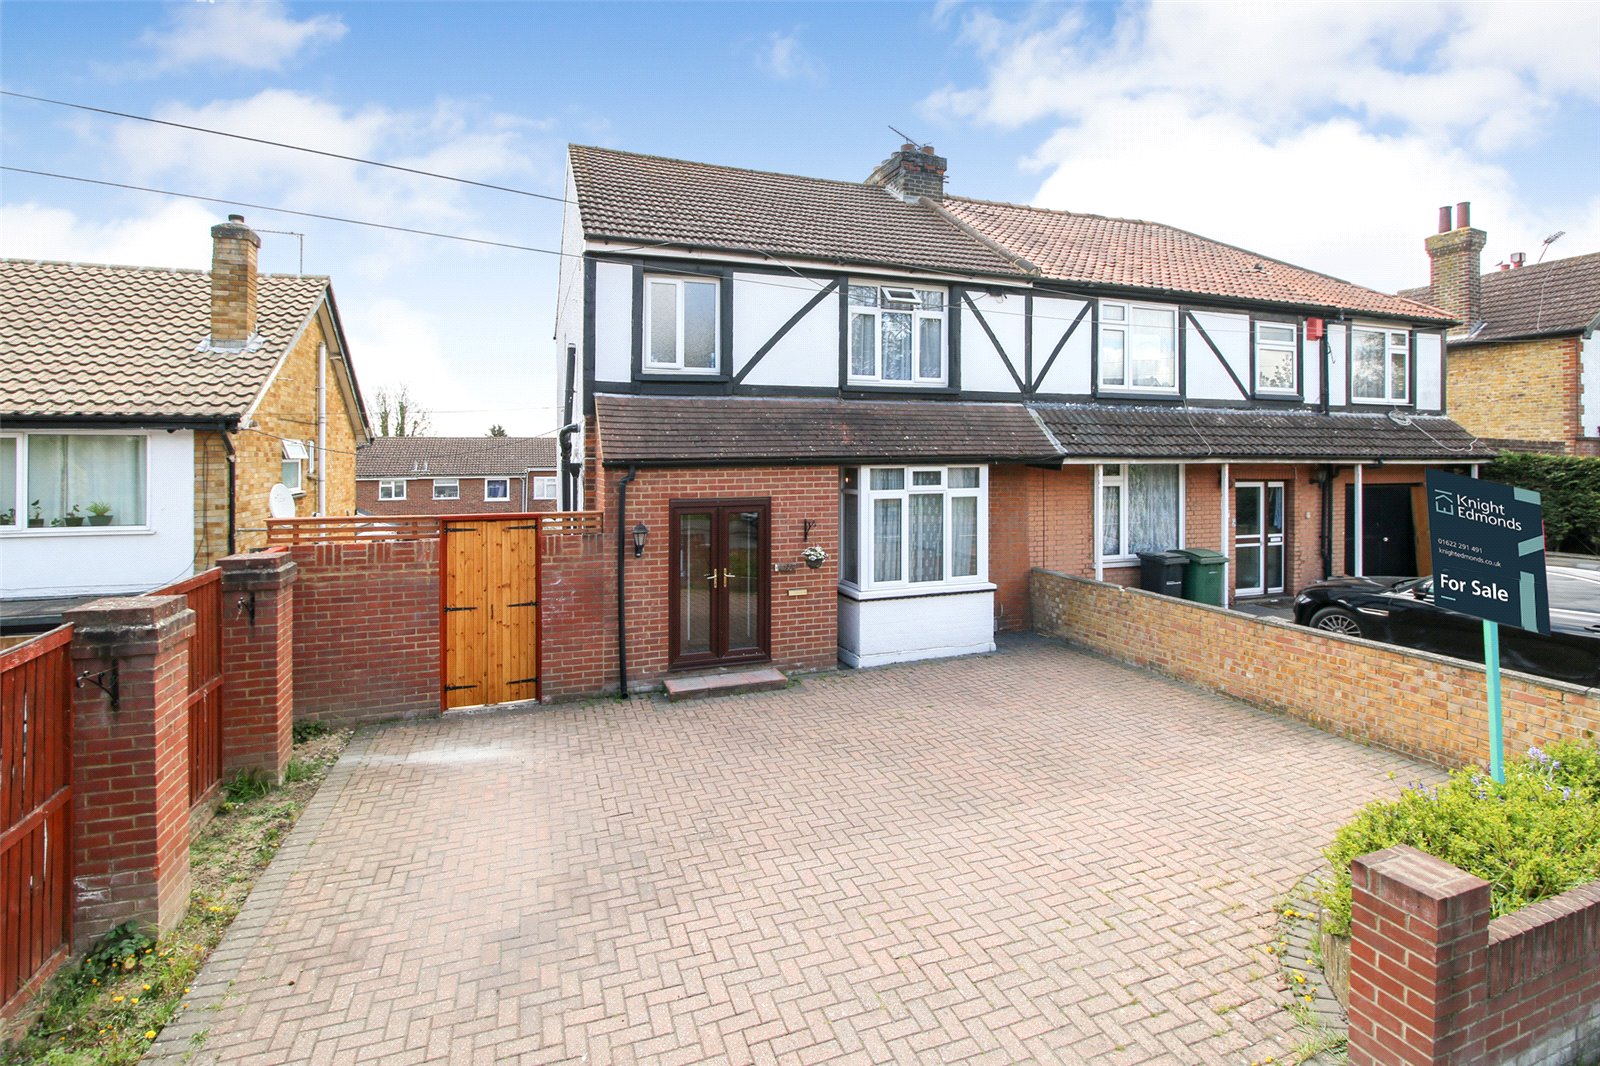 3 bed house for sale in Tonbridge Road, Maidstone, ME16